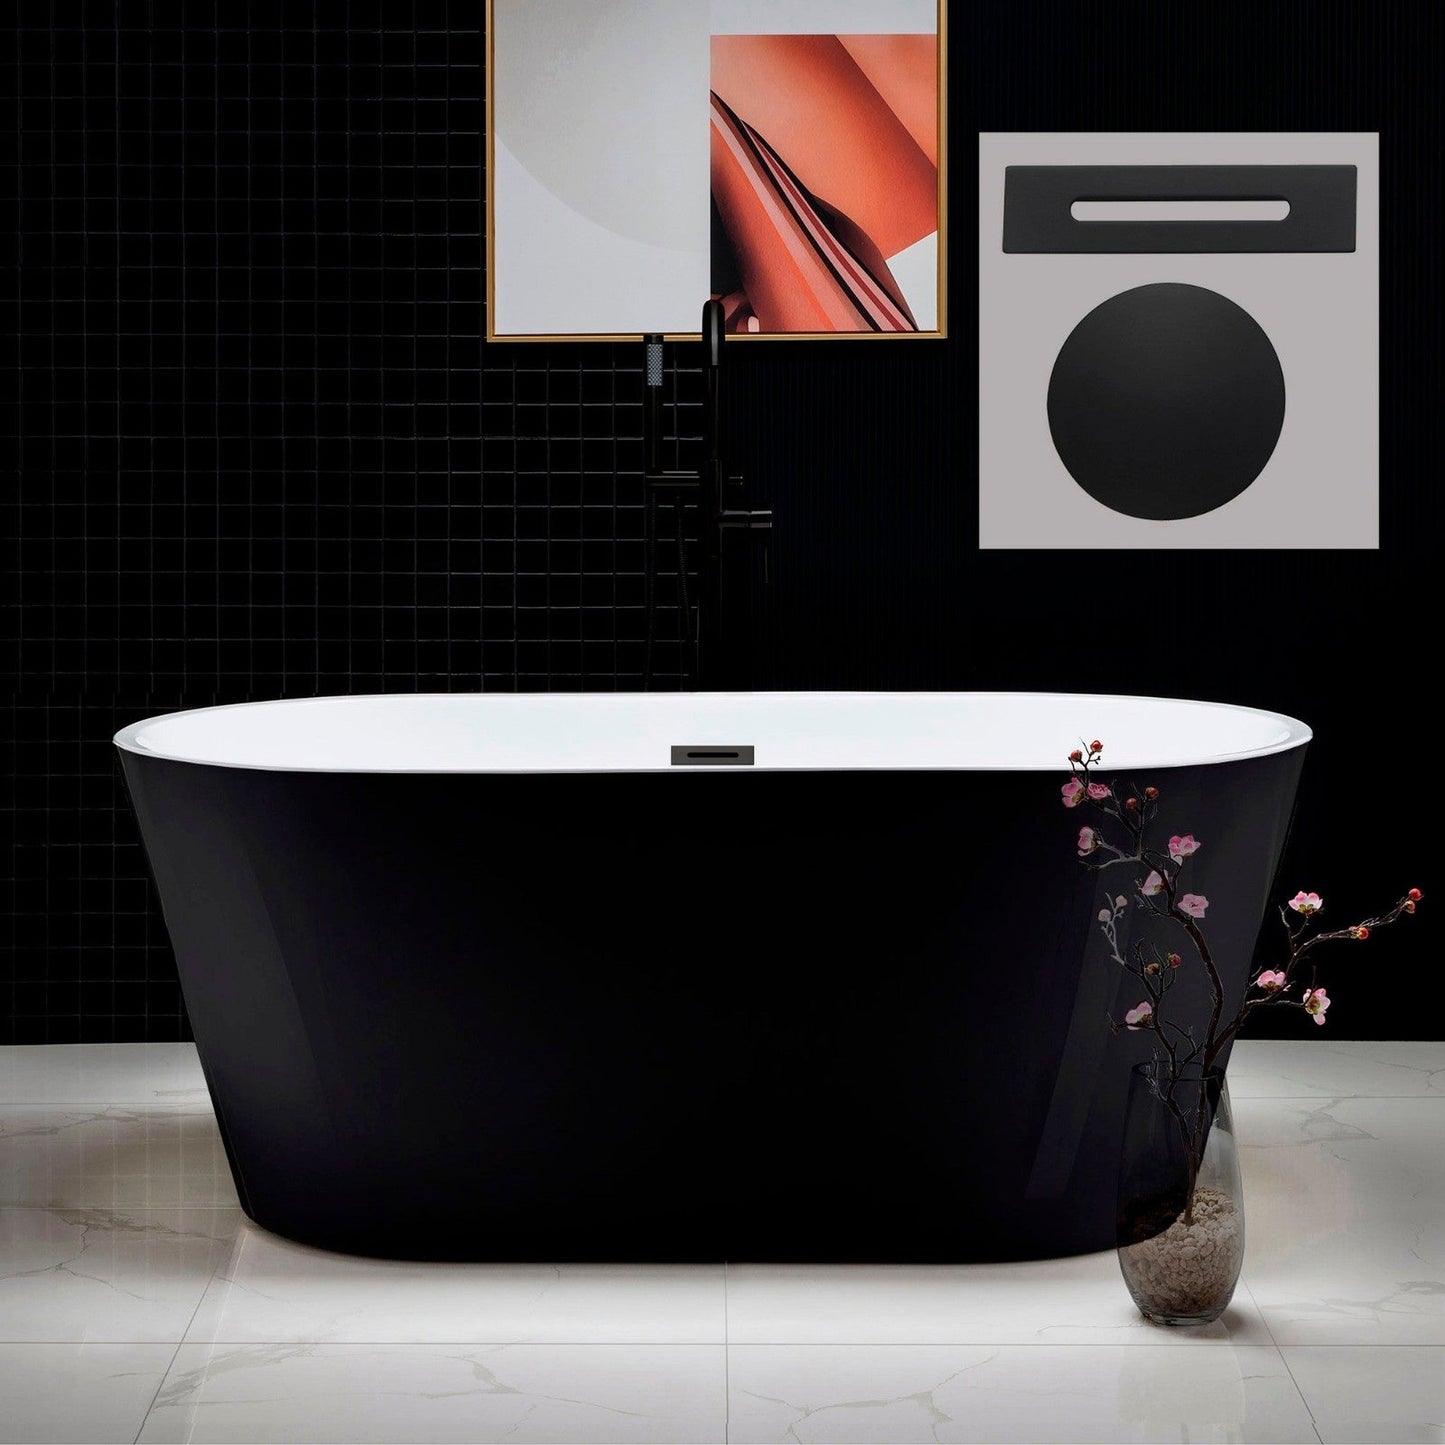 WoodBridge 59" Black Acrylic Freestanding Contemporary Soaking Bathtub With Matte Black Drain, Overflow, F0006MBSQ Tub Filler and Caddy Tray